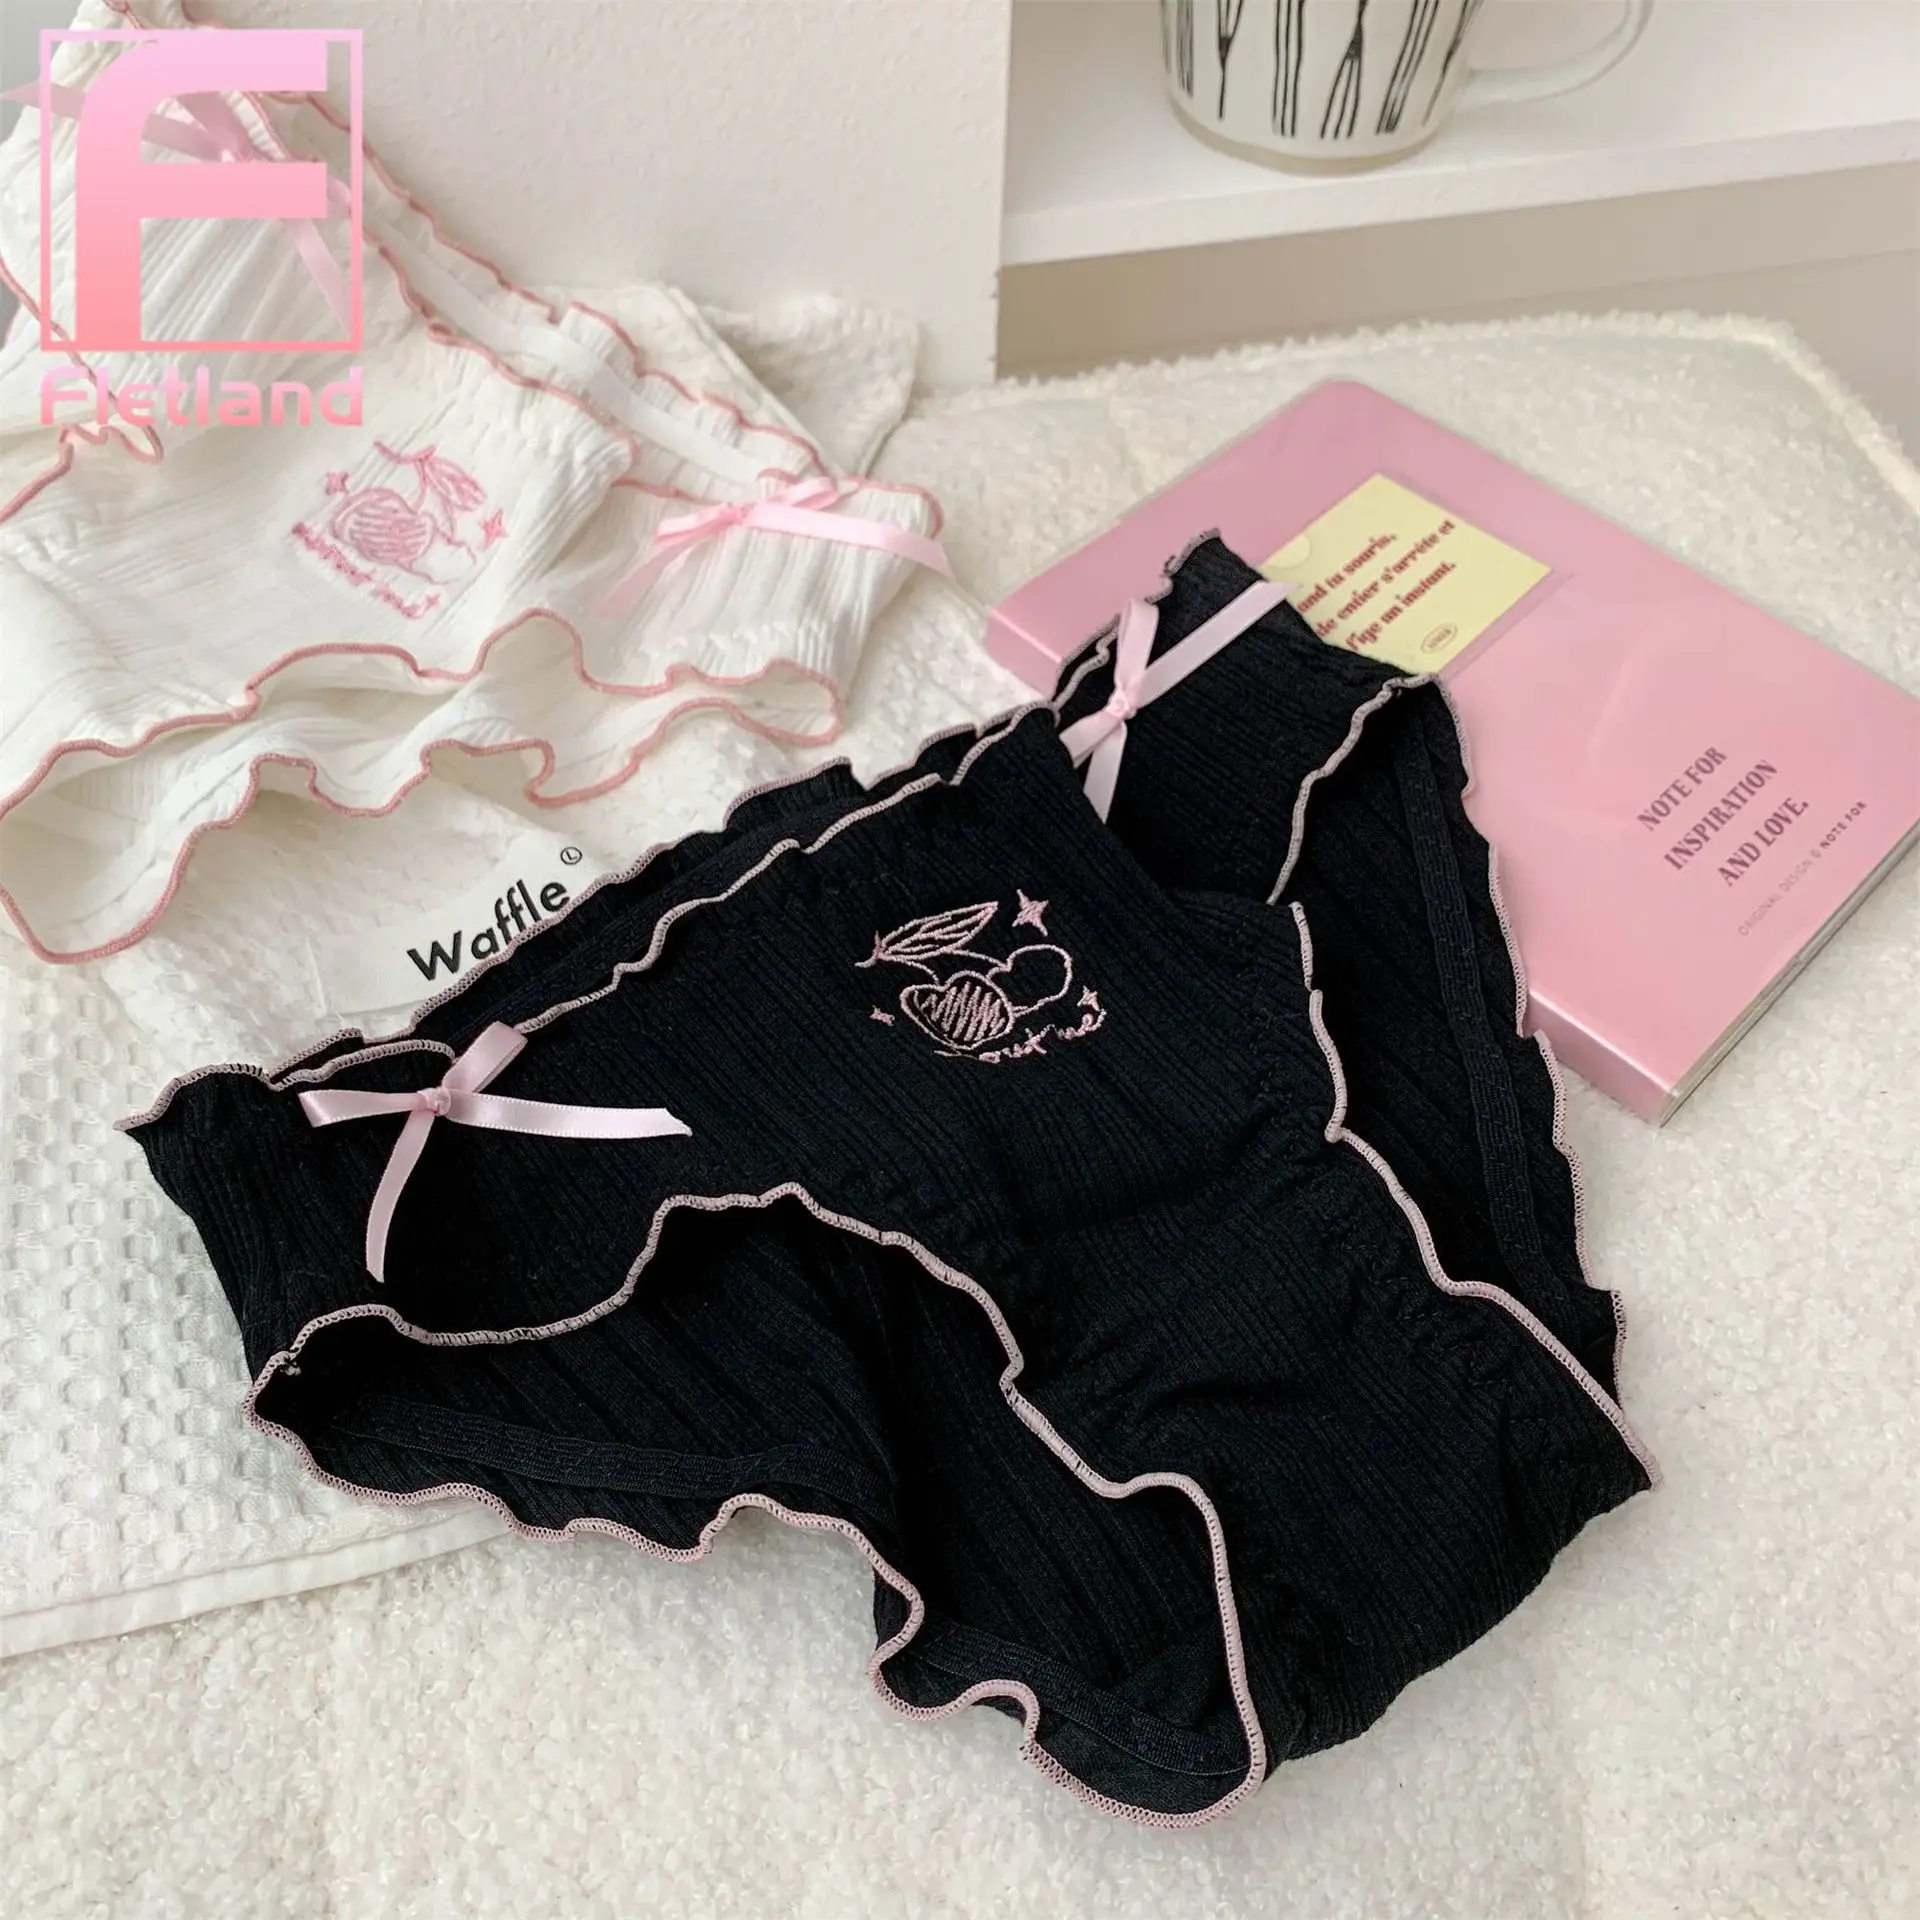 Women's Panties Sexy Mid Waist Breathable Briefs Embroidery Lingerie Erotic Cute Sweet Underwear Temptation Intimates Underpants